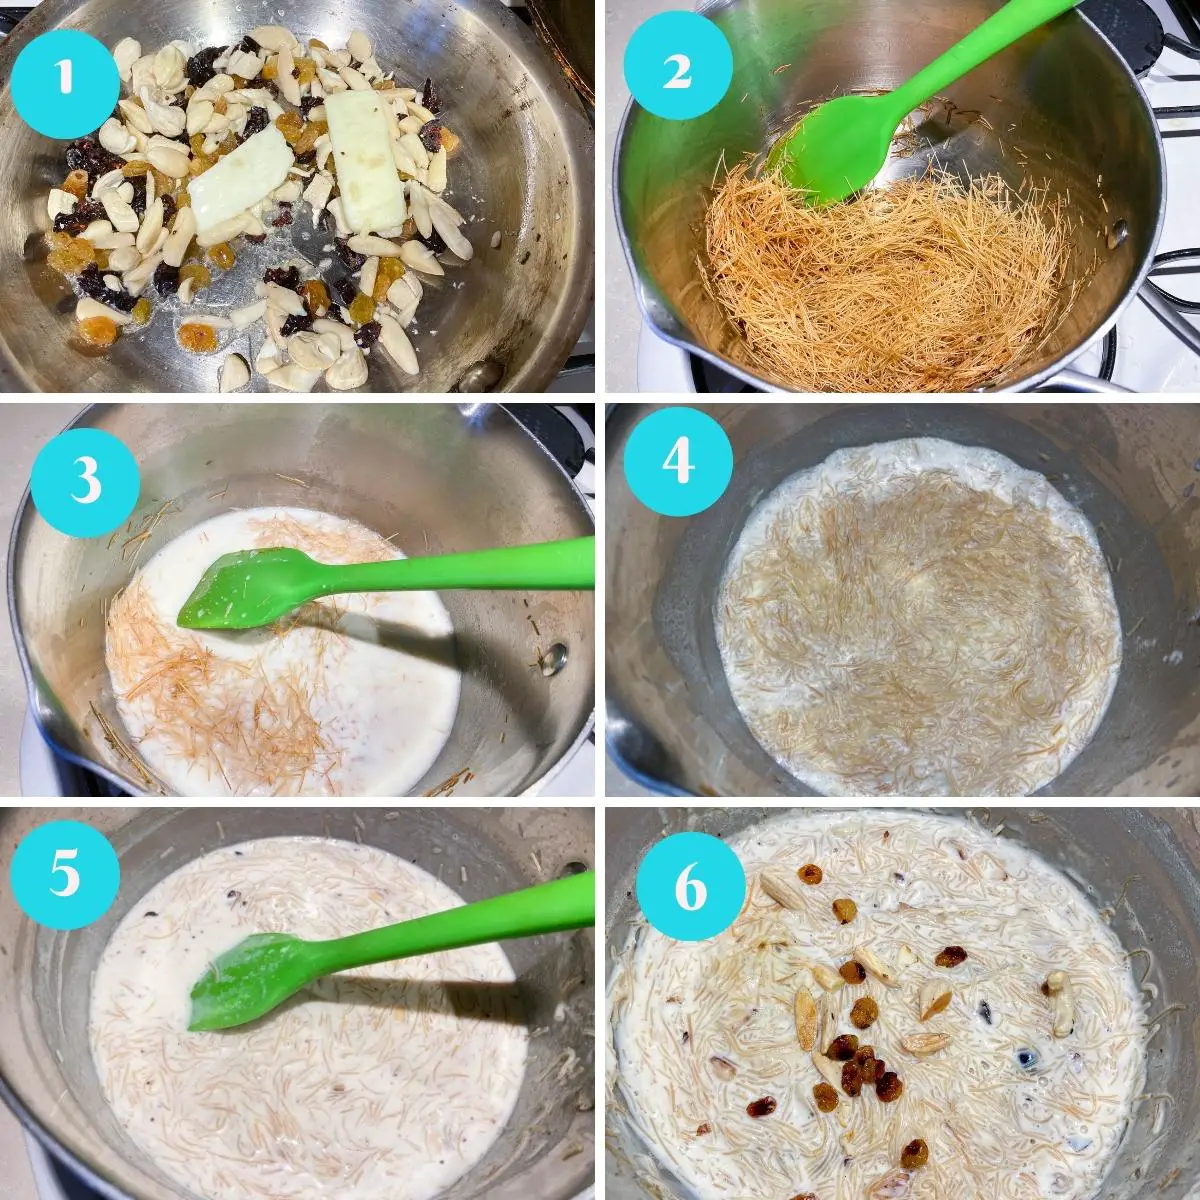 Step by step progress pictures for vermicelli pudding.